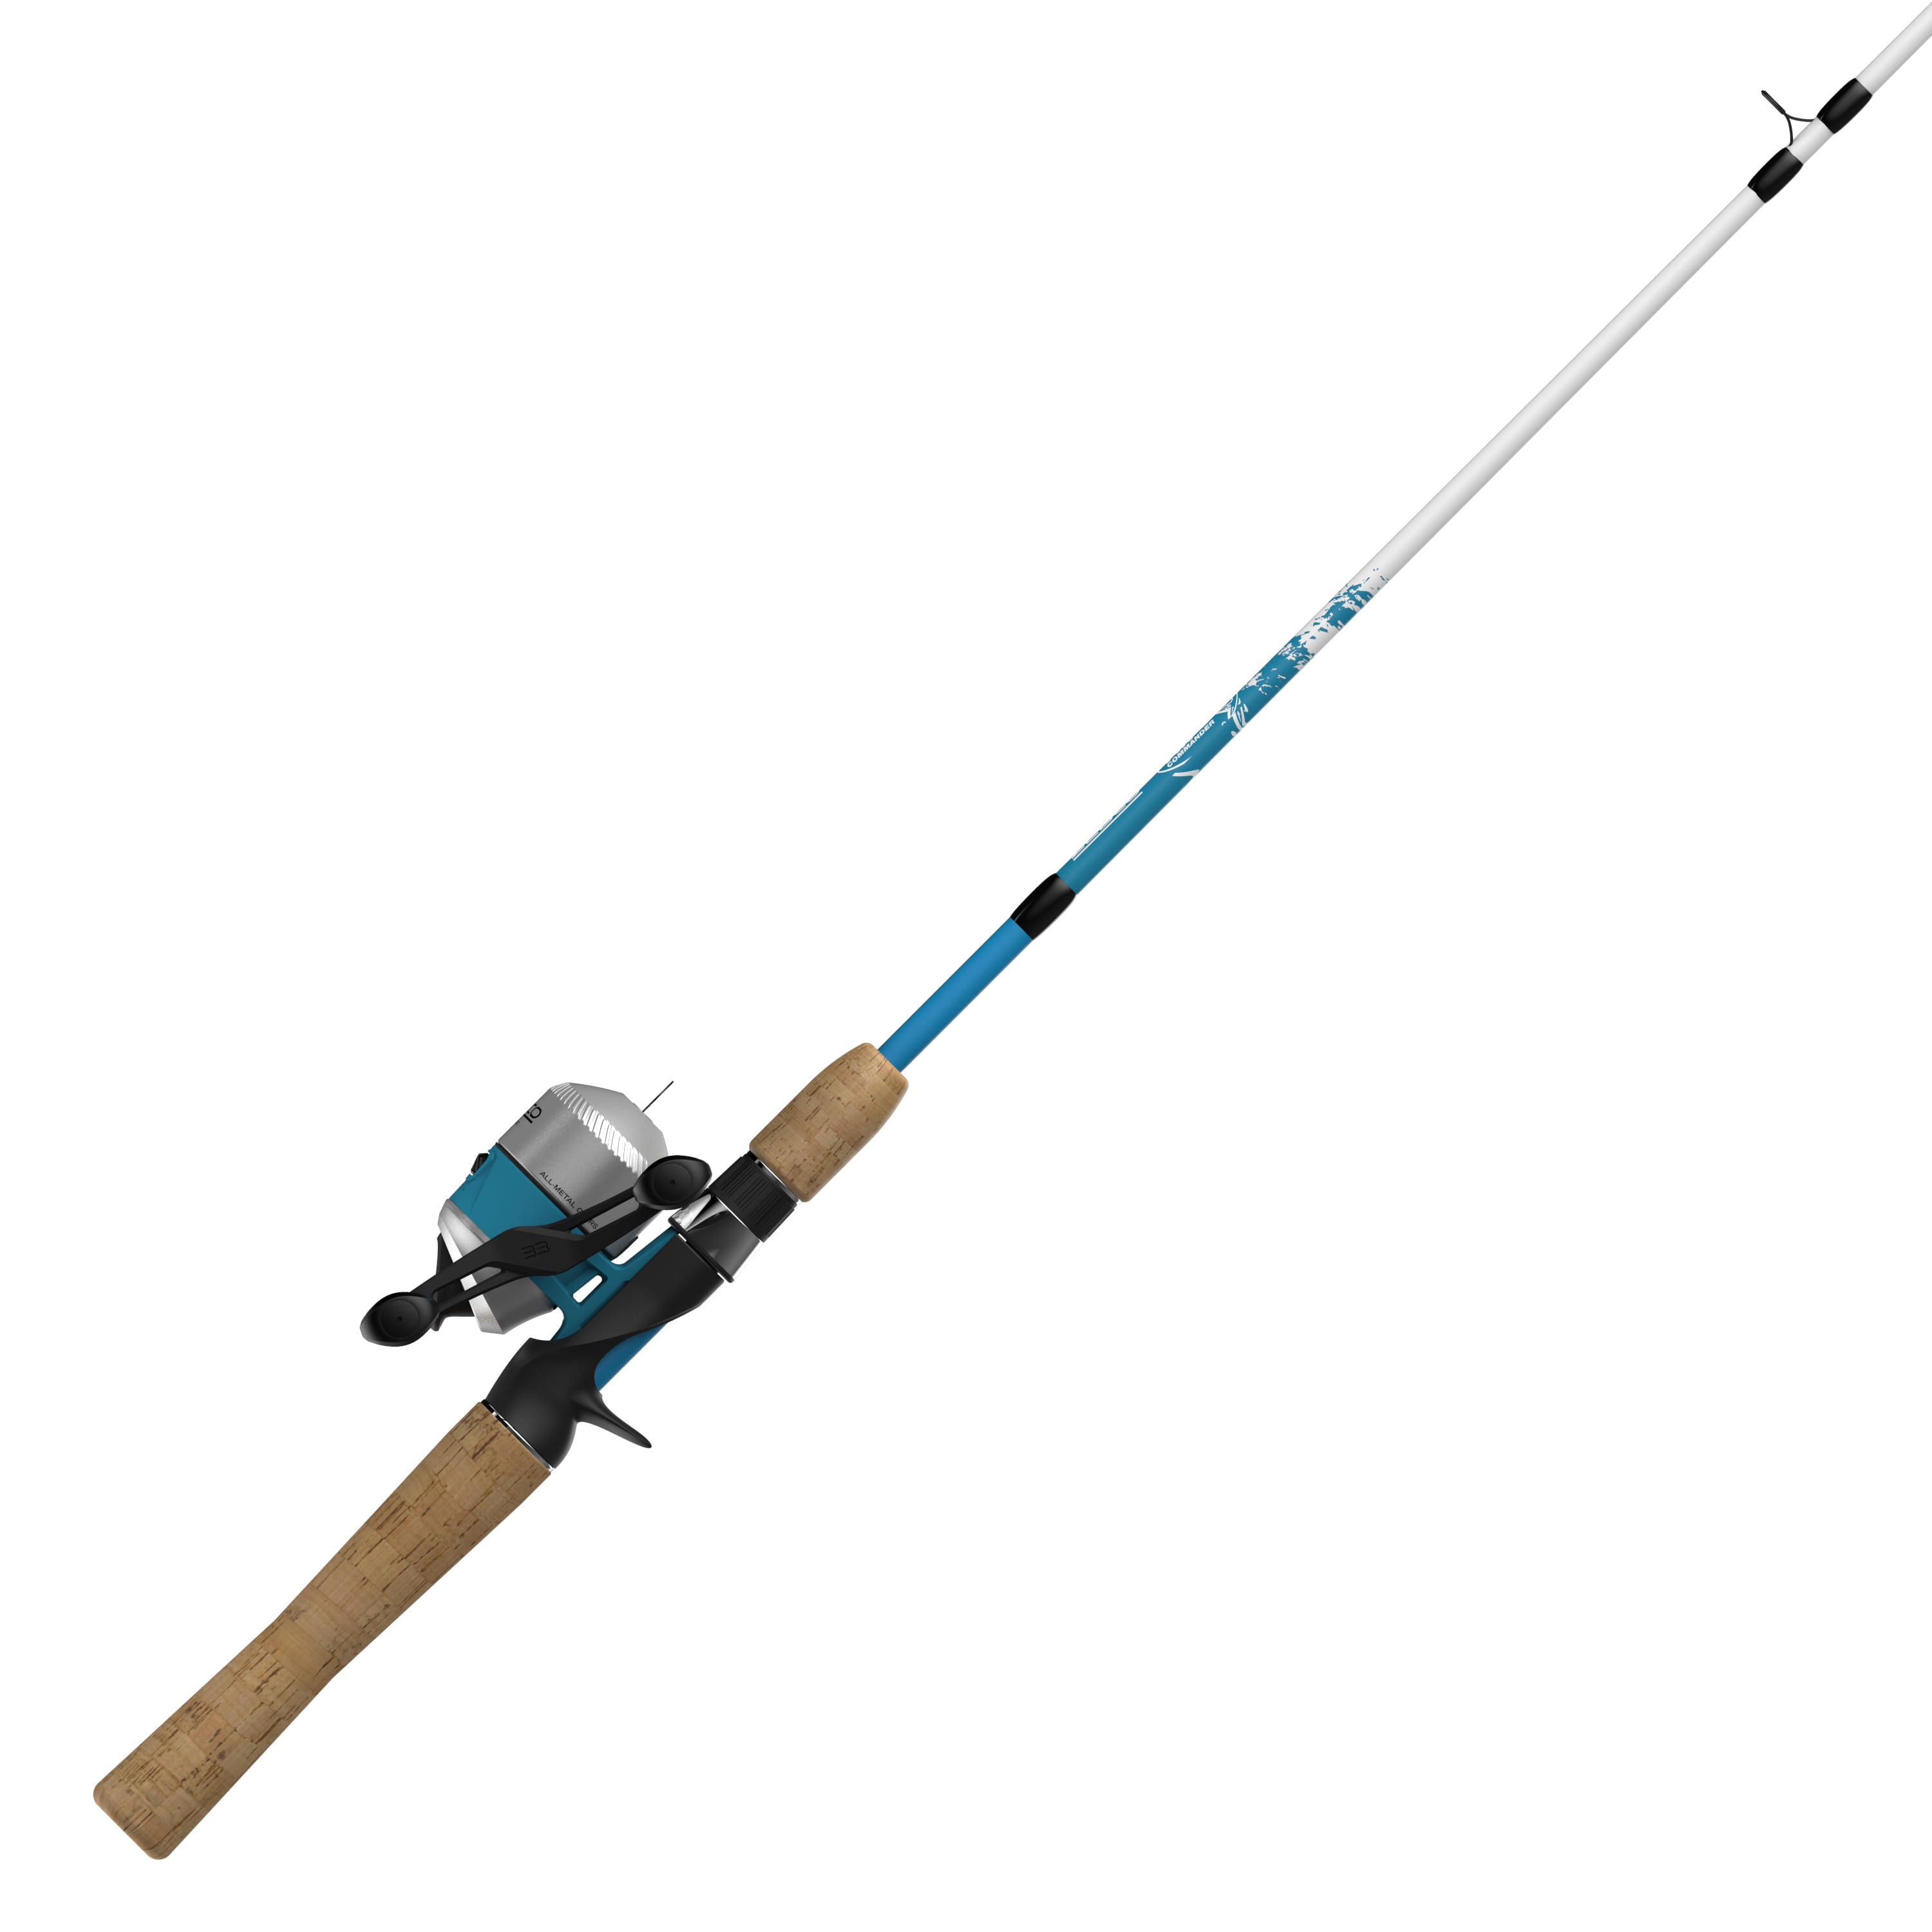 I have this five piece zebco rod and reel, I want to put new line